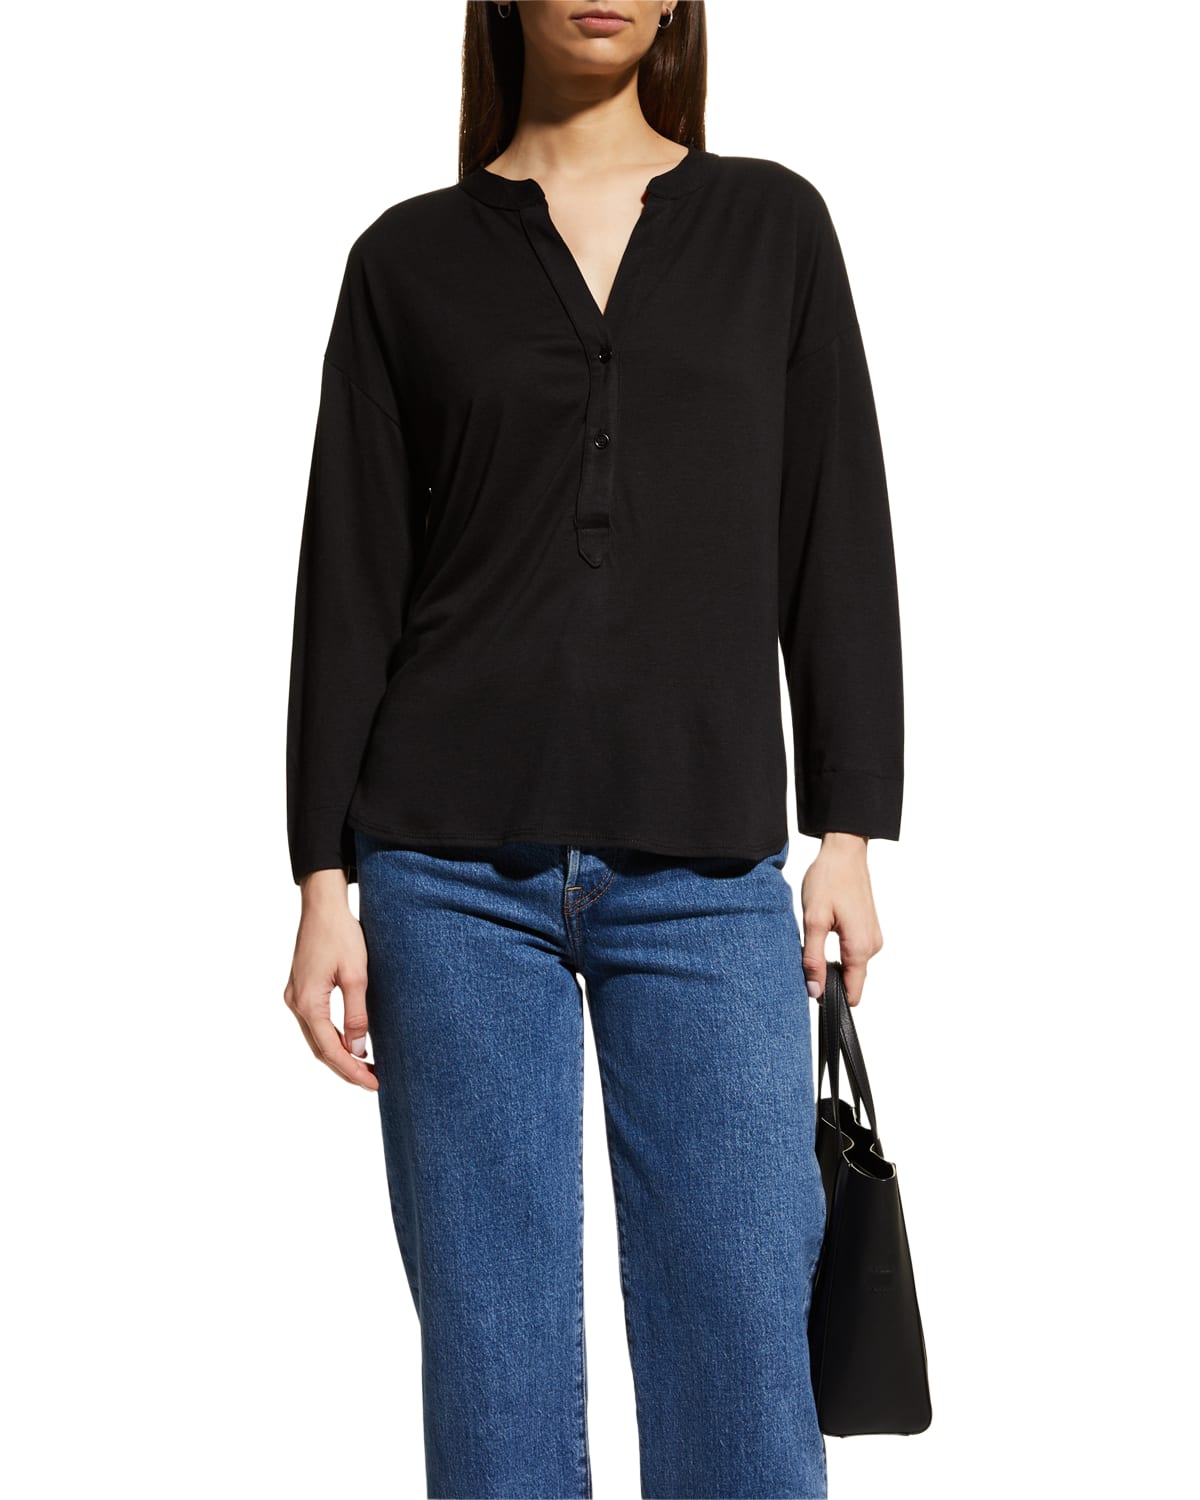 MAJESTIC LYOCELL COTTON SEMI-RELAXED 3/4-SLEEVE HENLEY TOP